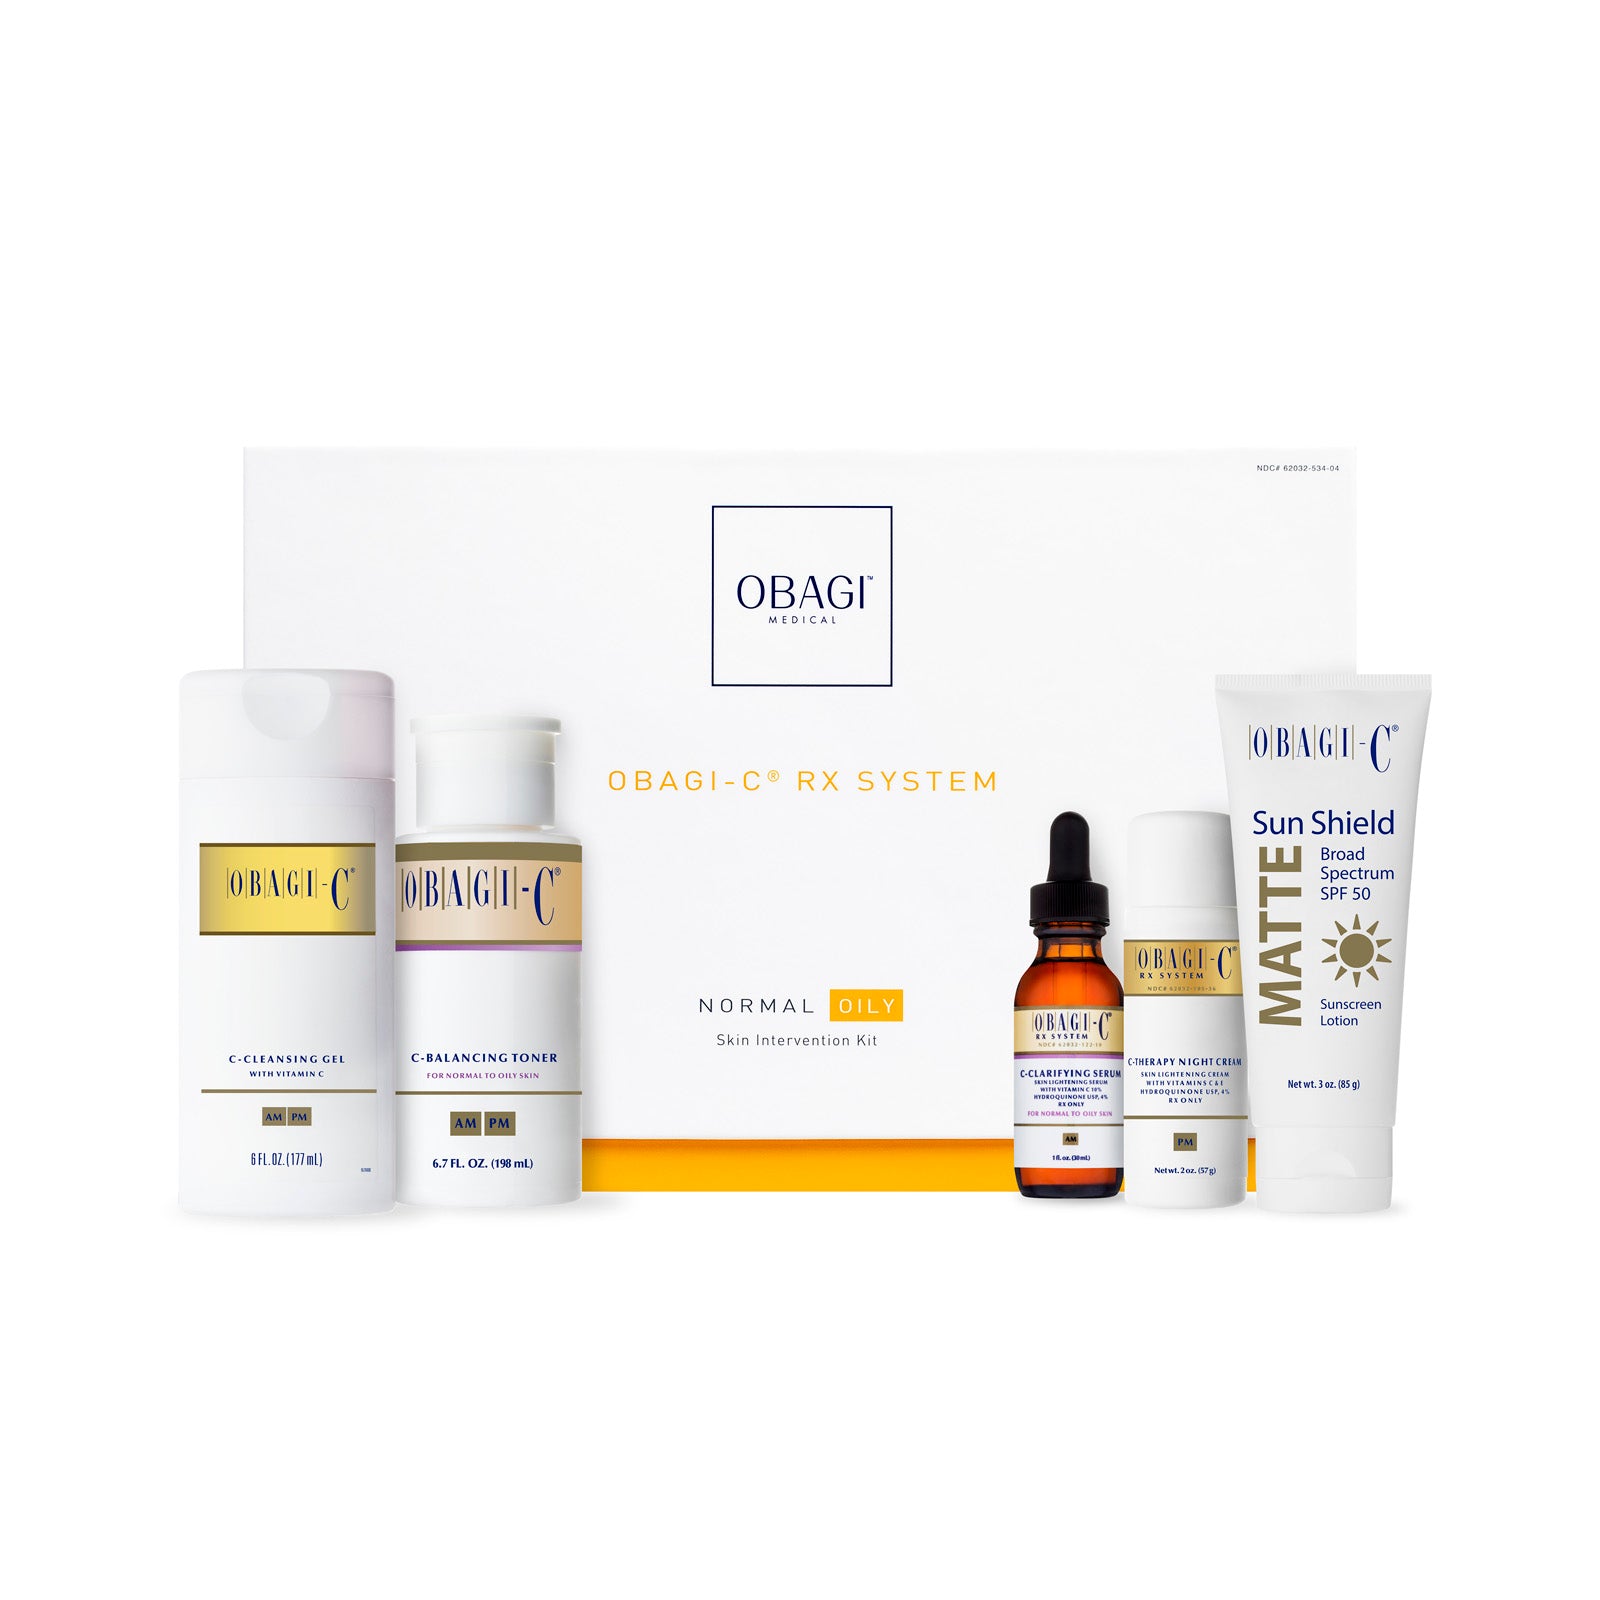 Obagi-C Rx System Norm-Oily Corrective transformation system with vitamin C - Beauty By Vianna